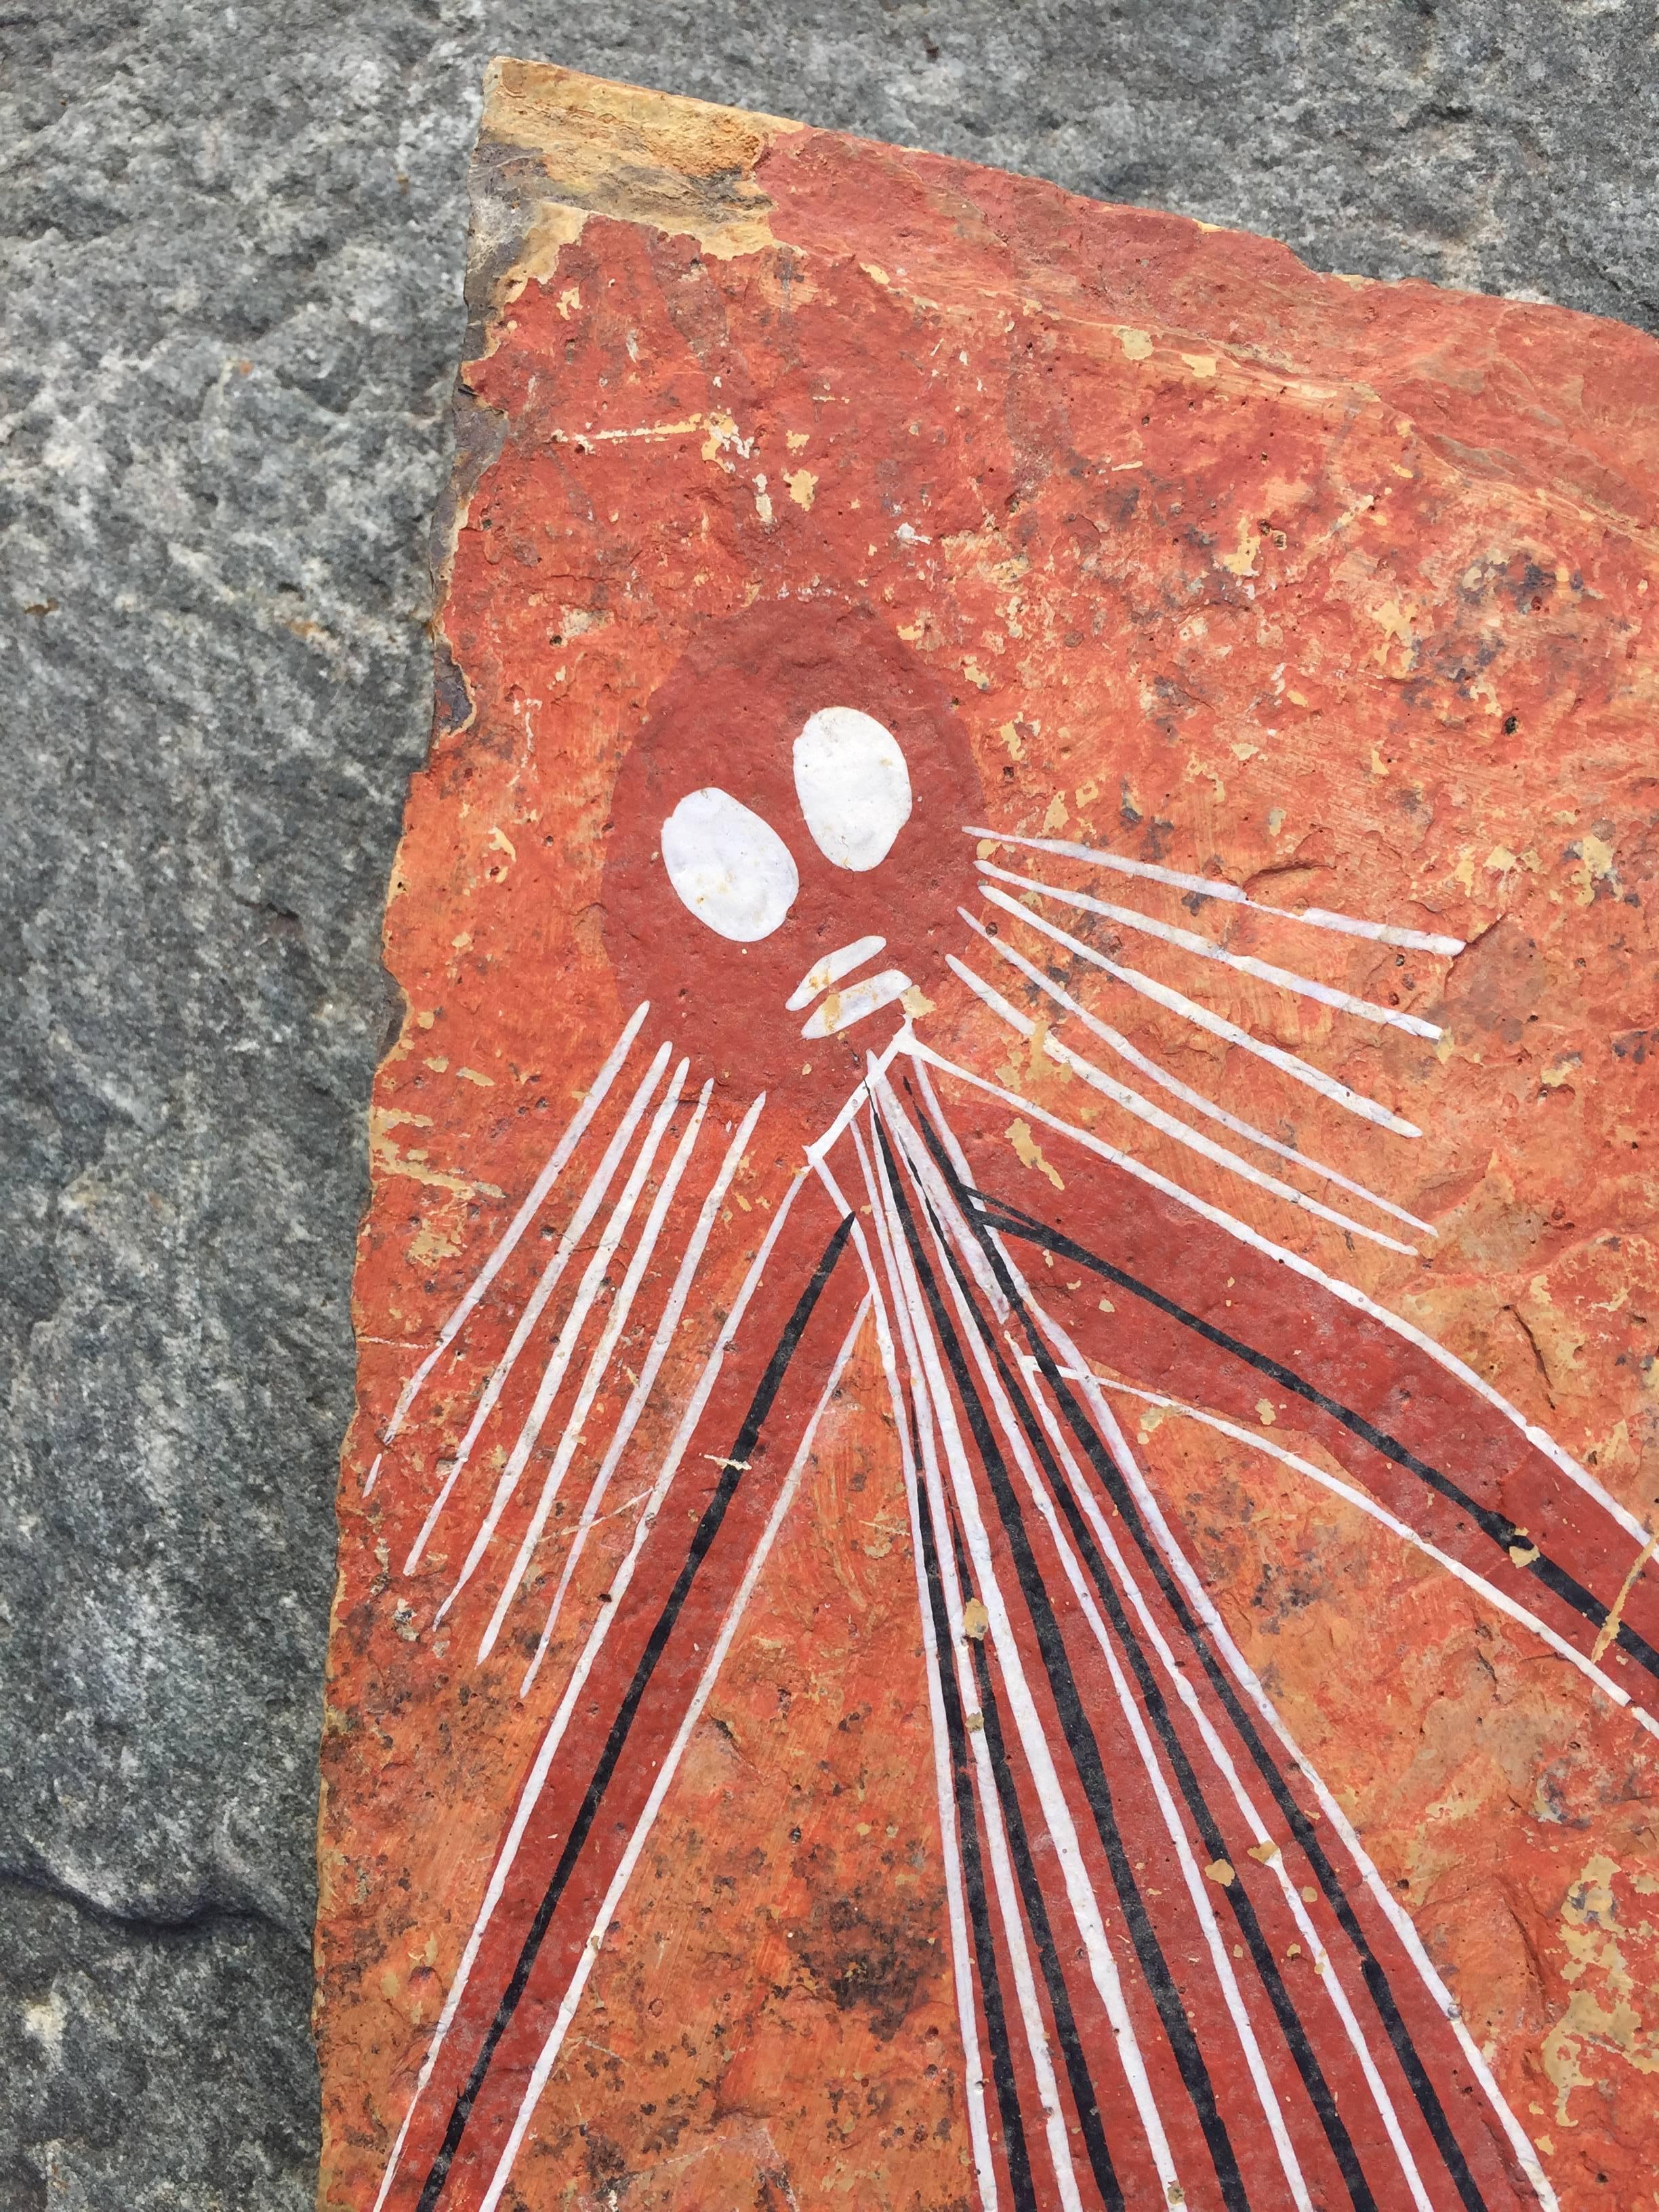 SALE - NOW SAVE 20% OR MORE

Acquired over thirty years ago comes this Australian Aboriginal Folk Art -Mimi Spirits- painting on rock- a one-of-a-kind sculpture. Colors are vibrant and like new. This is an authentic aboriginal work of art with